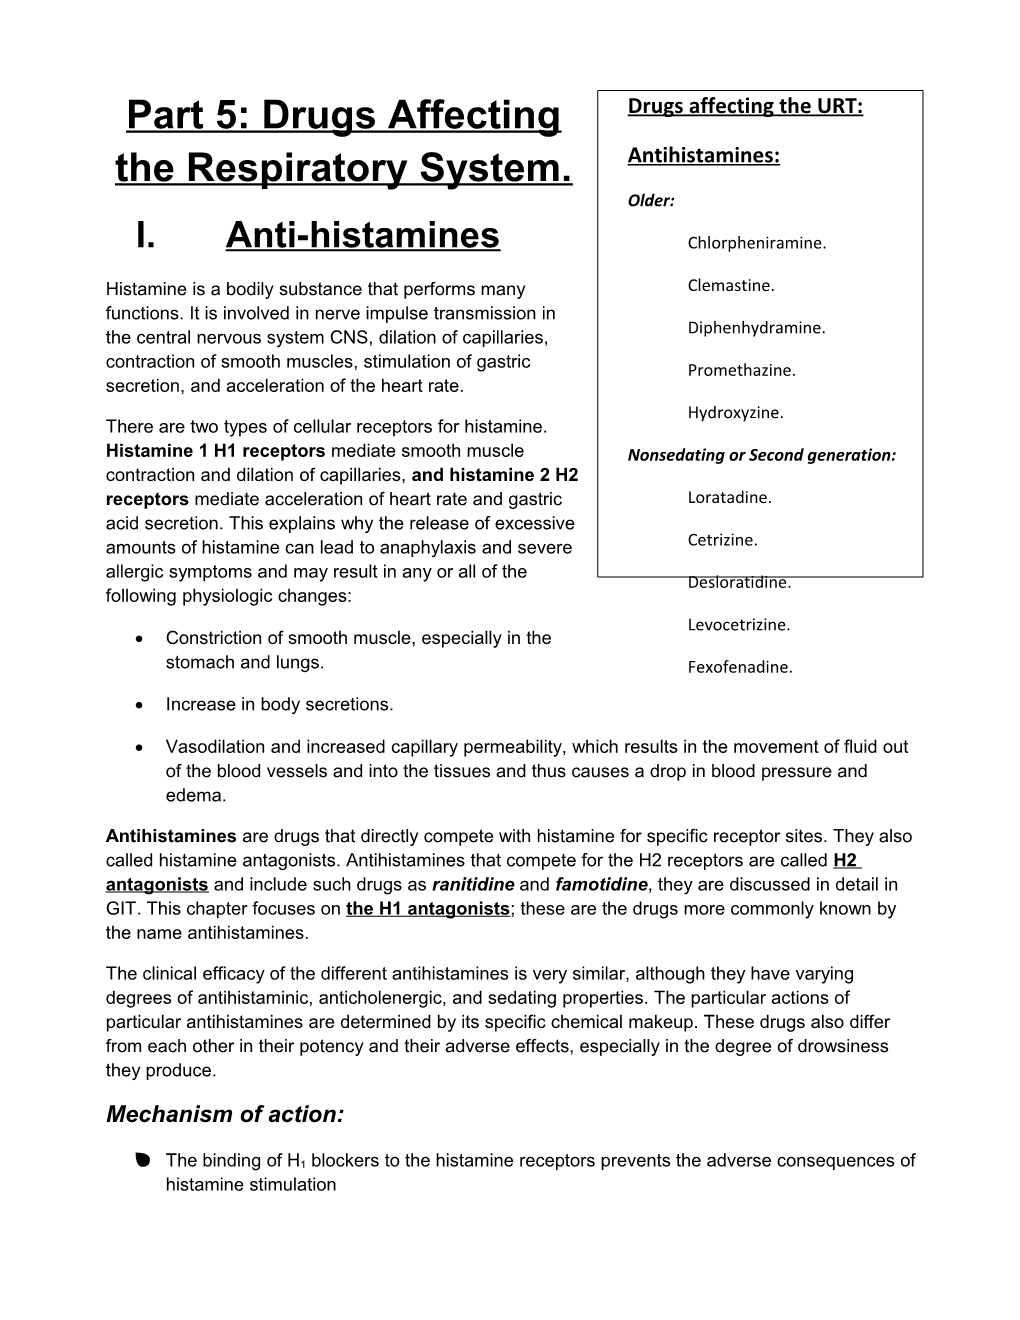 Part 5: Drugs Affecting the Respiratory System